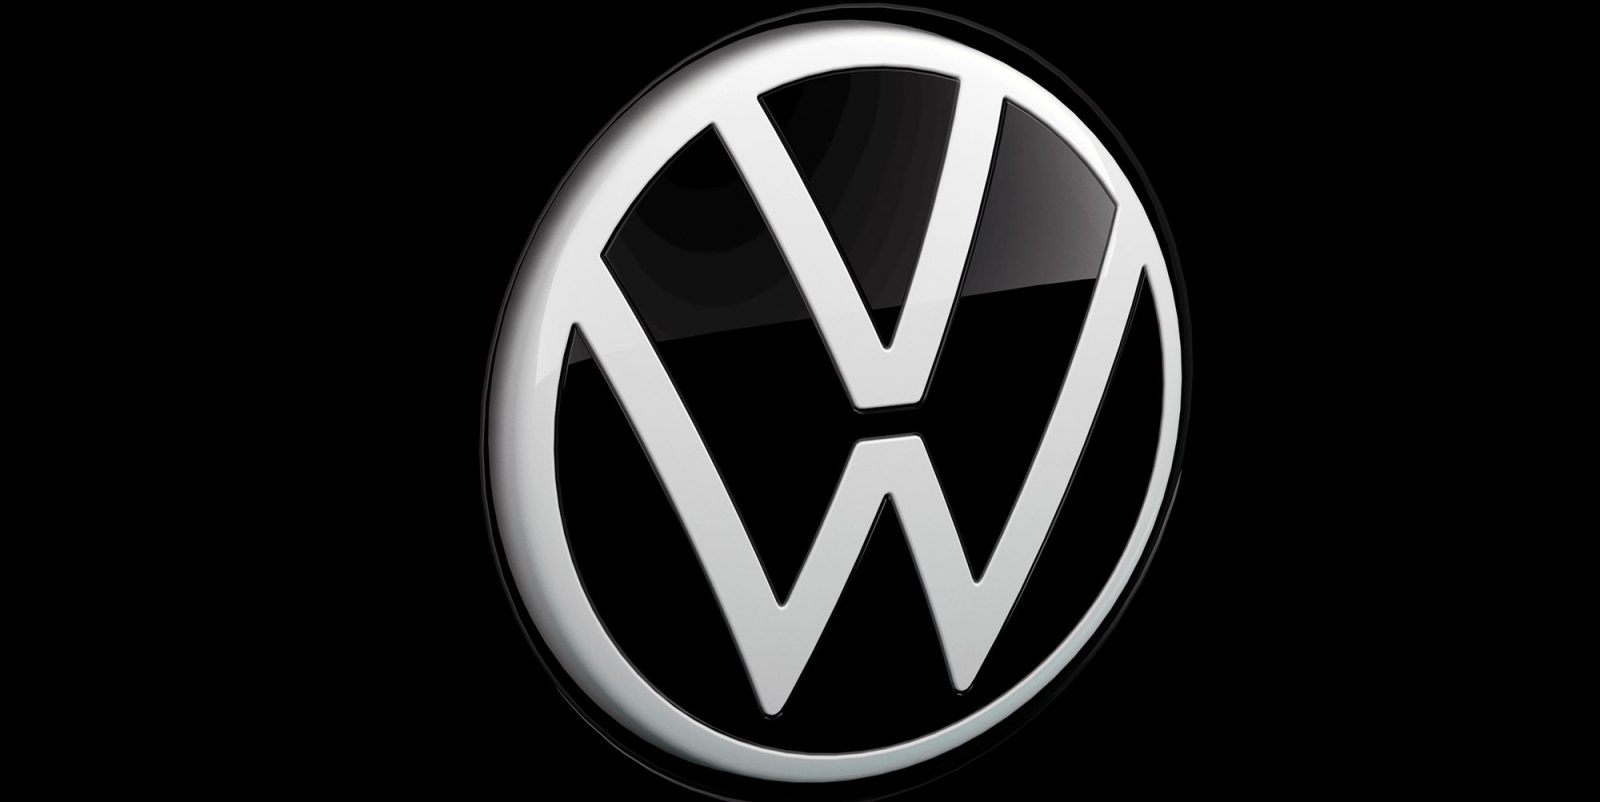 VW and Hummer create new logos to help shed lingering image as polluters